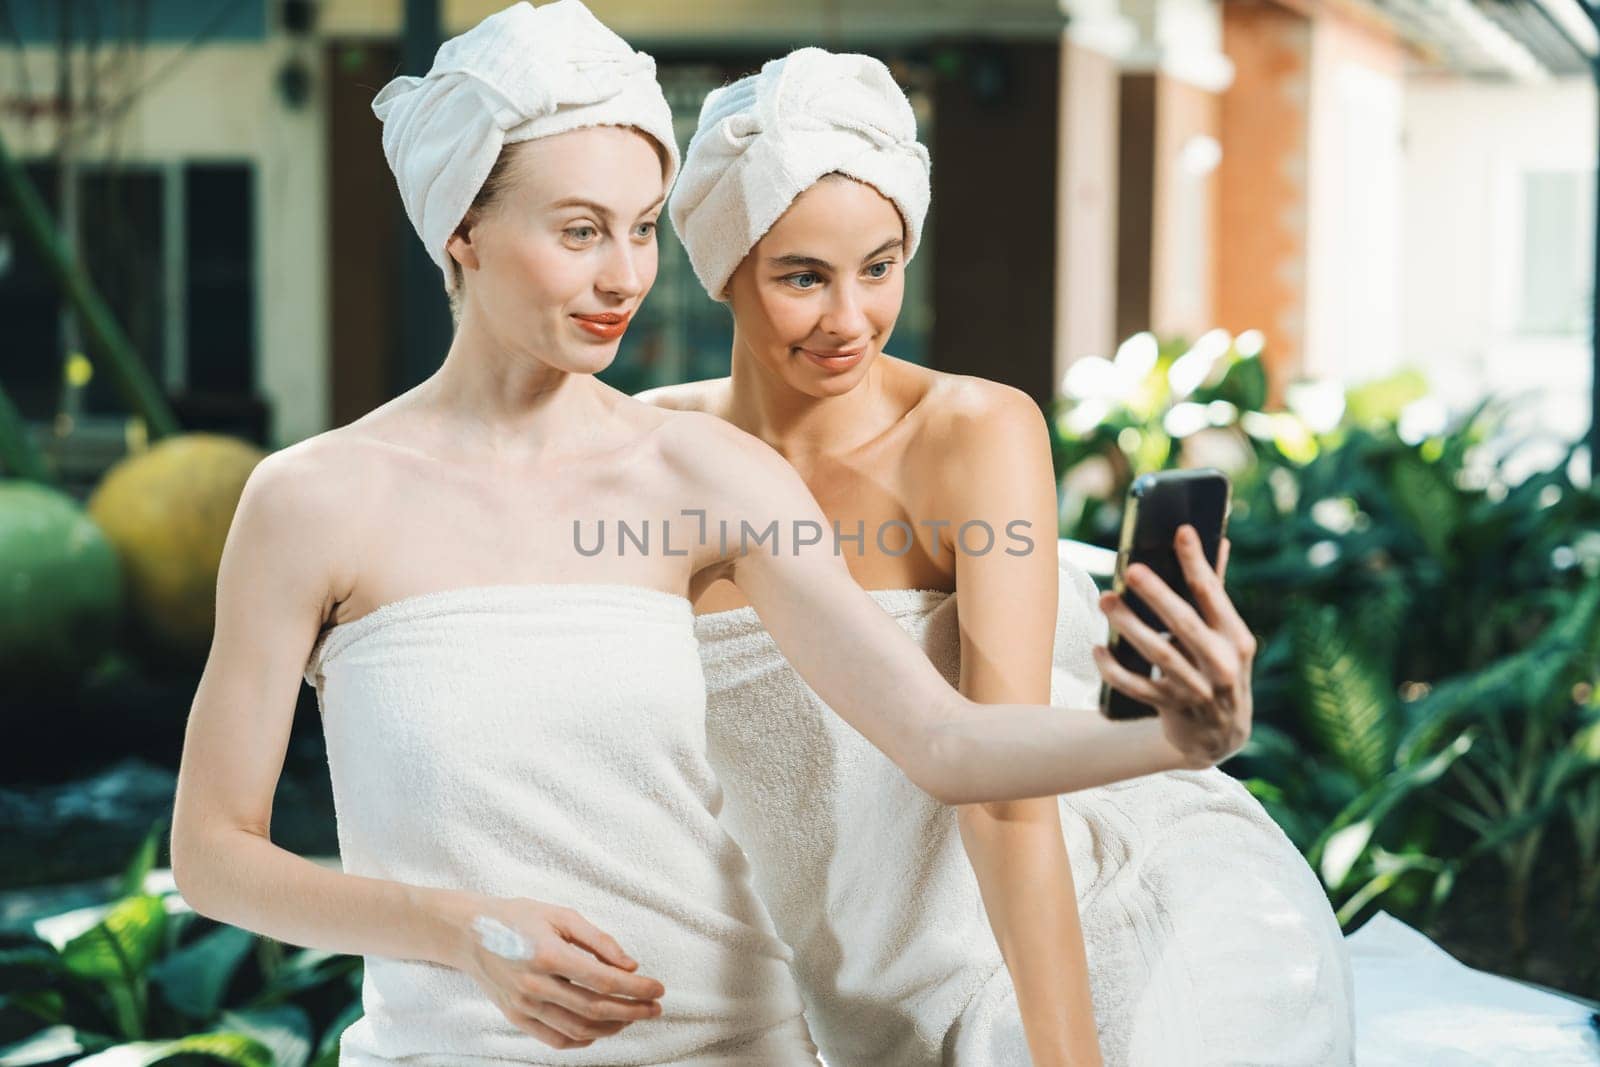 Couple of beautiful women in white towel taking a photo at outdoor. Tranquility. by biancoblue